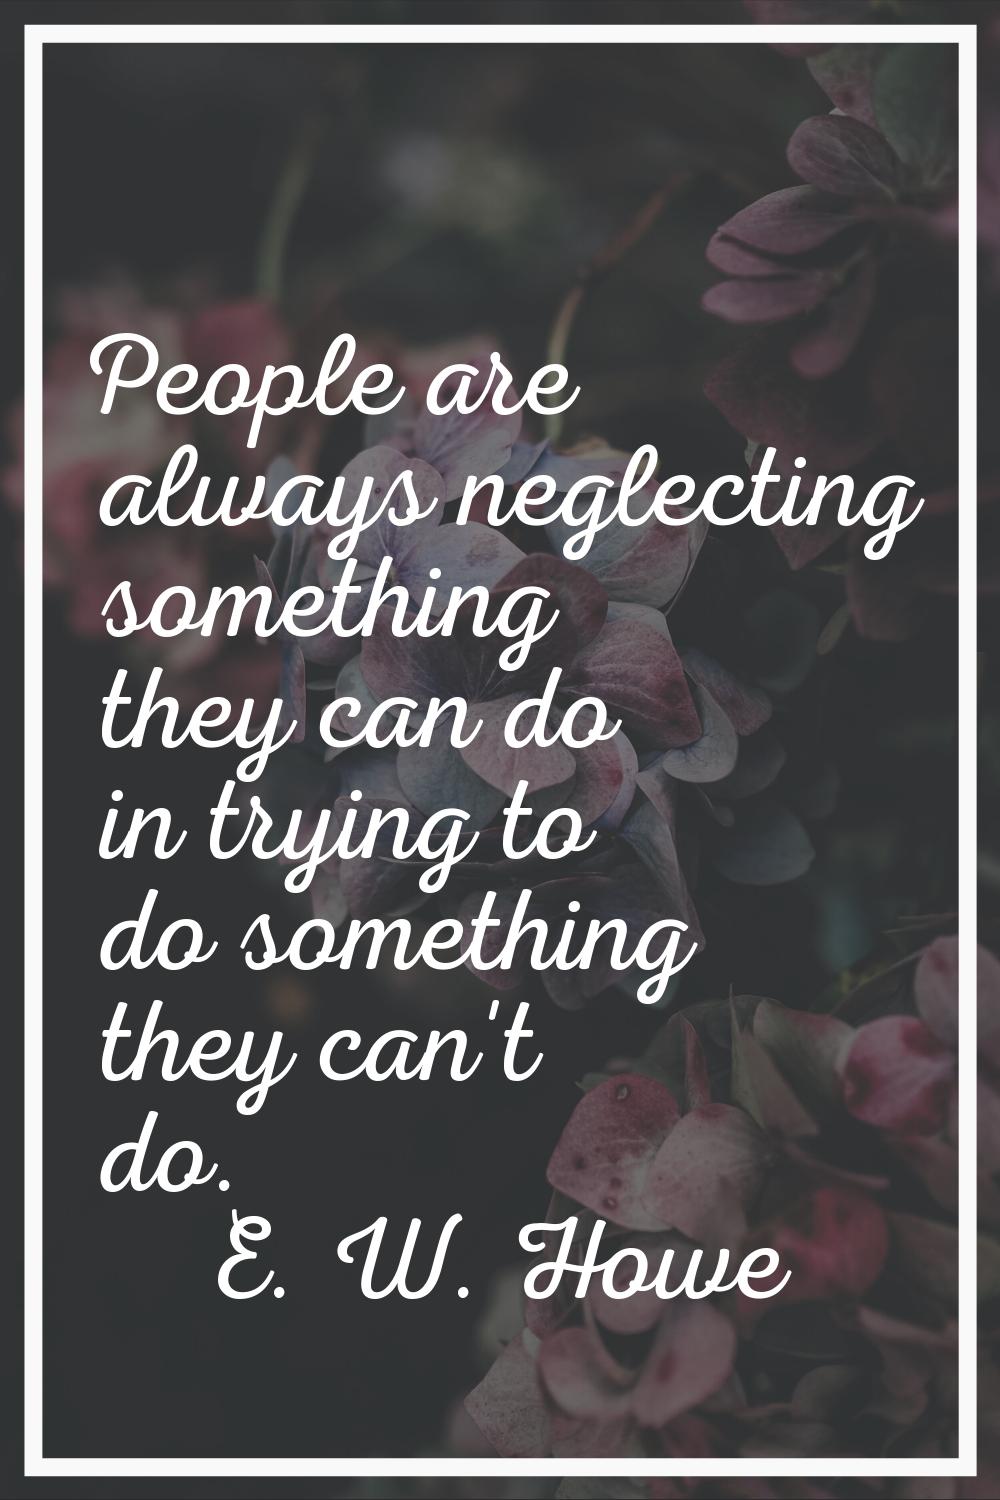 People are always neglecting something they can do in trying to do something they can't do.